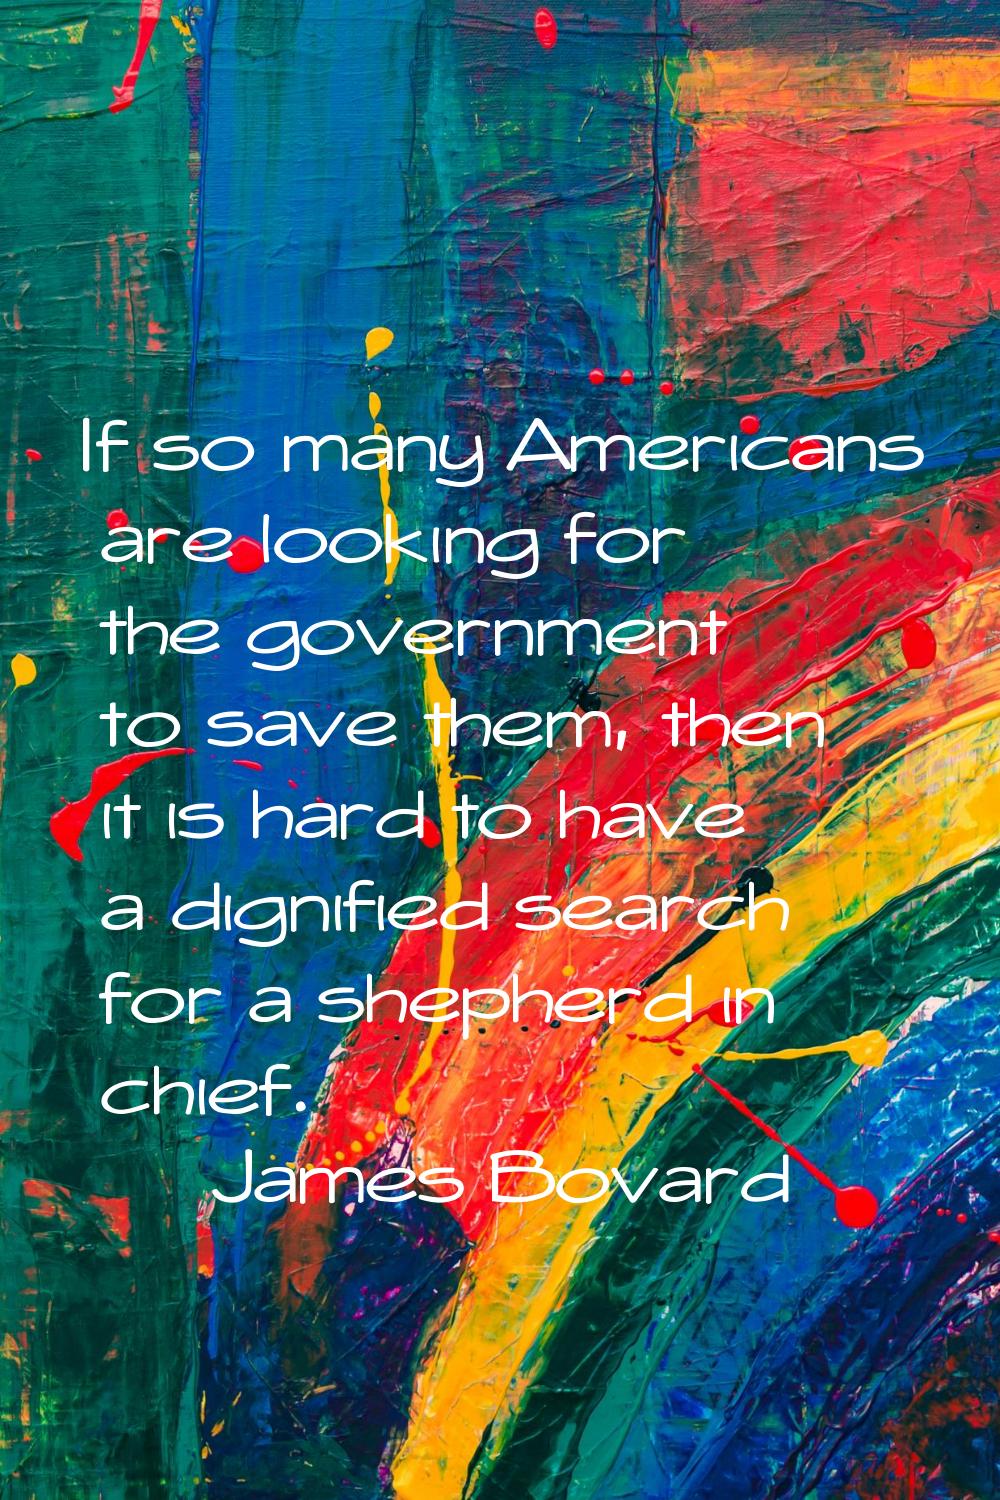 If so many Americans are looking for the government to save them, then it is hard to have a dignifi